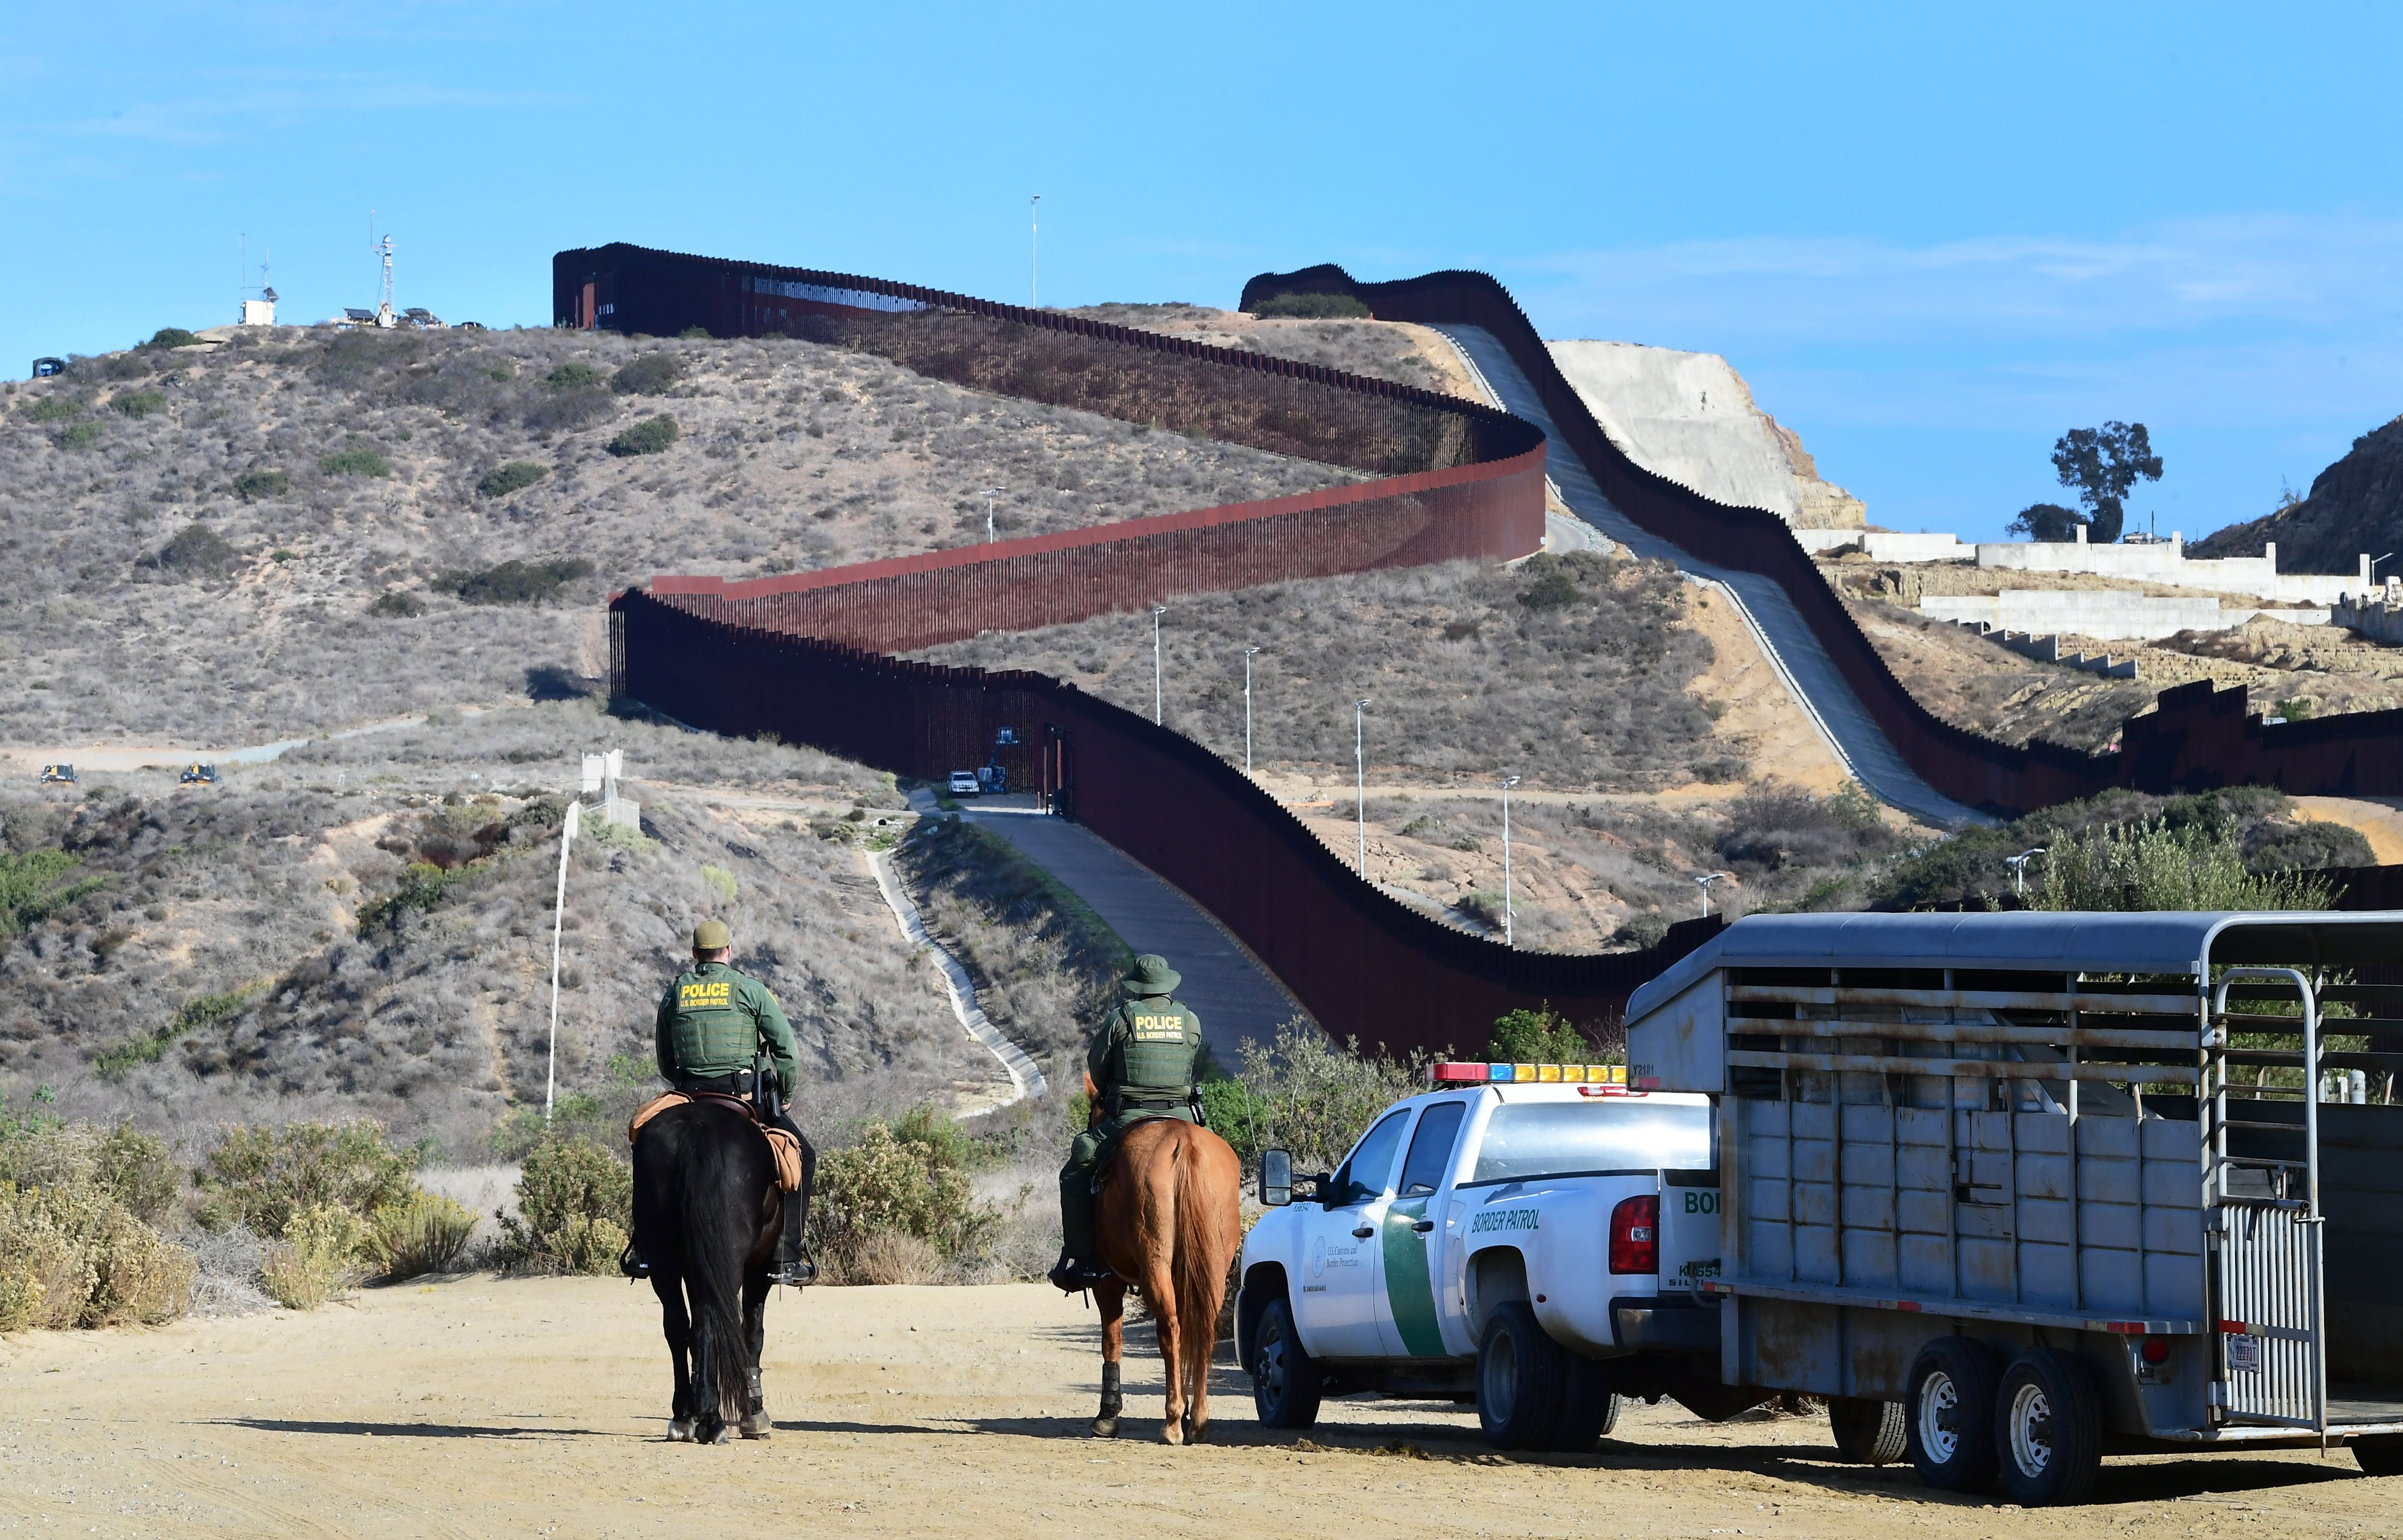 US Homeland Security Border Patrol agents on horseback patrol the area near where the US-Mexico border fence meets the Pacific Ocean in Imperial Beach, California, on November 7